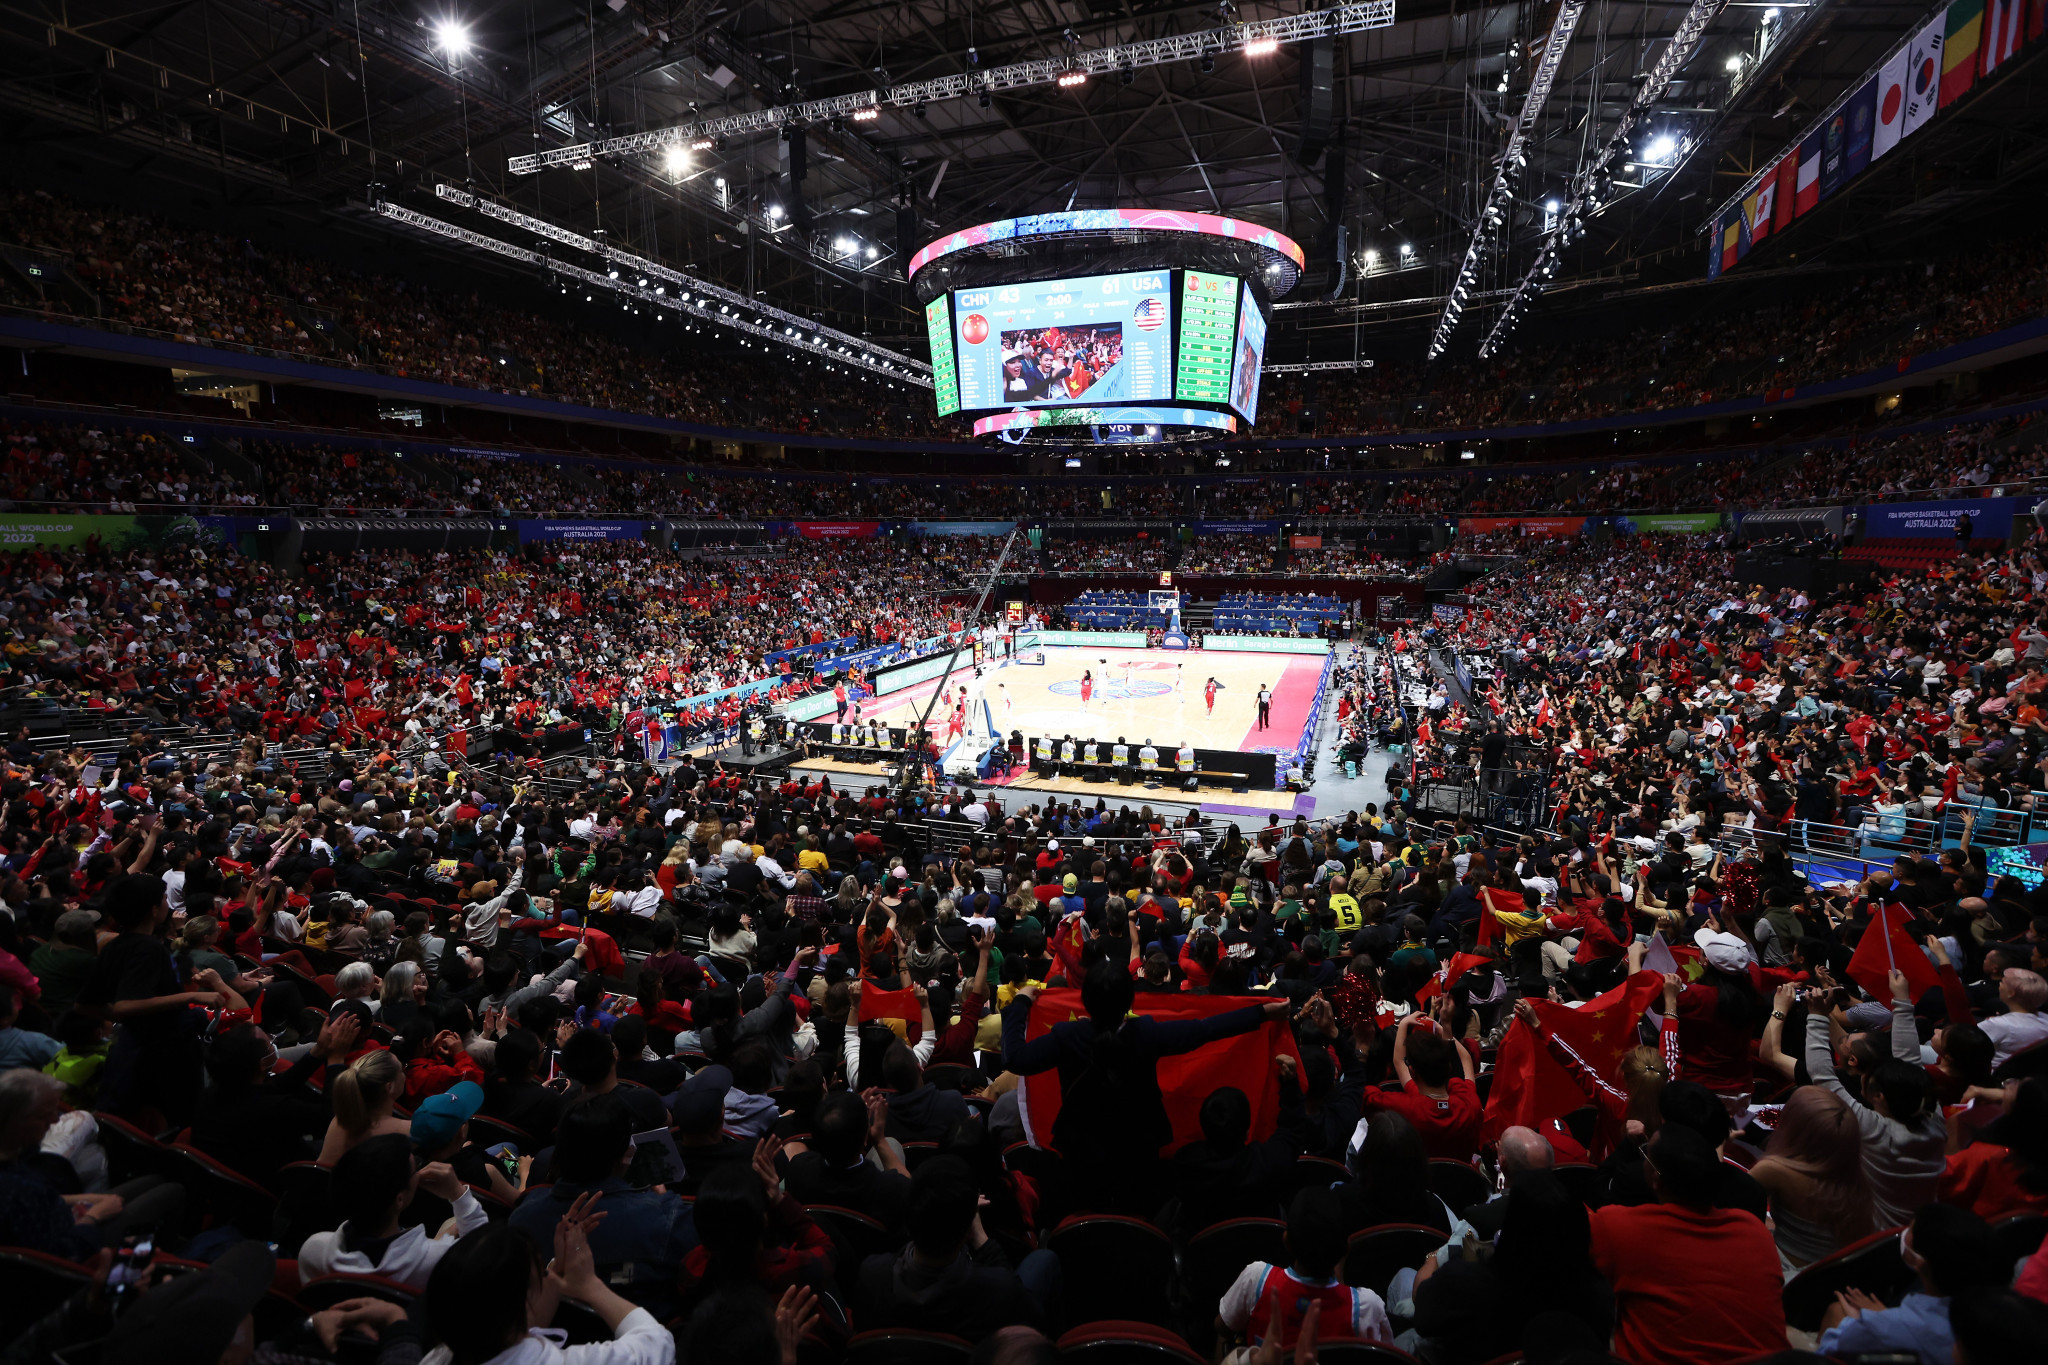 Attendance records set at Women's Basketball World Cup